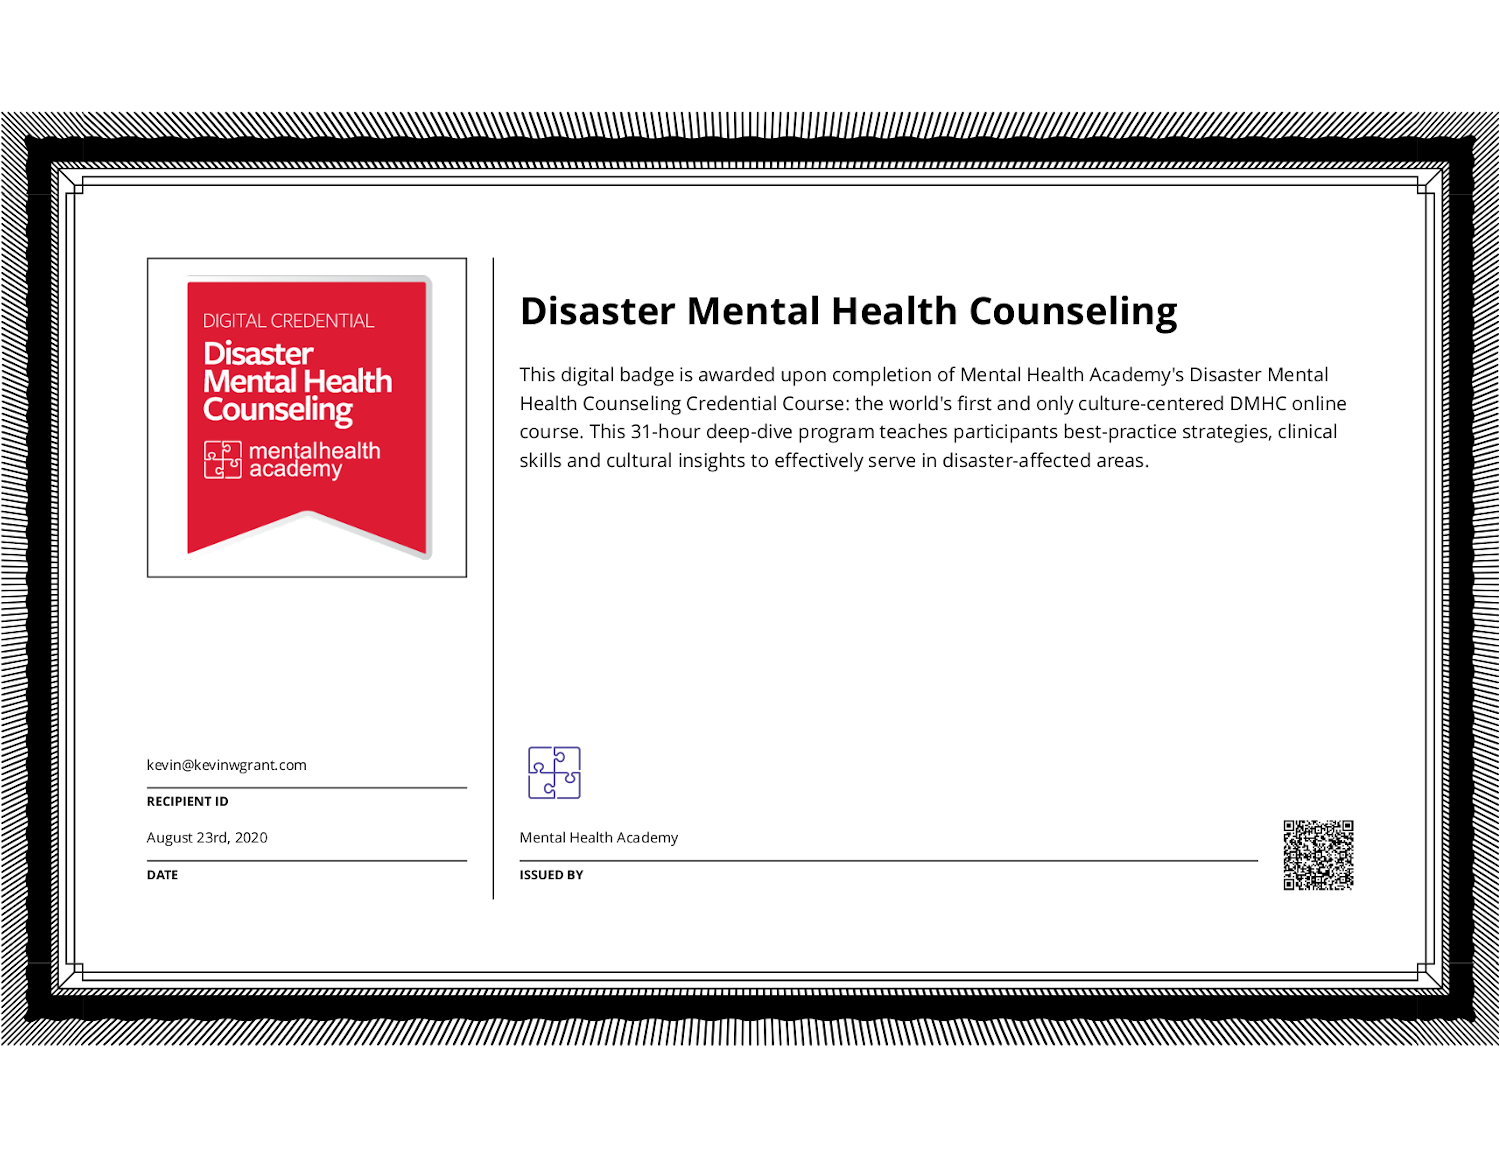 Disaster Mental Health Counseling Credential- Mental Health Academy